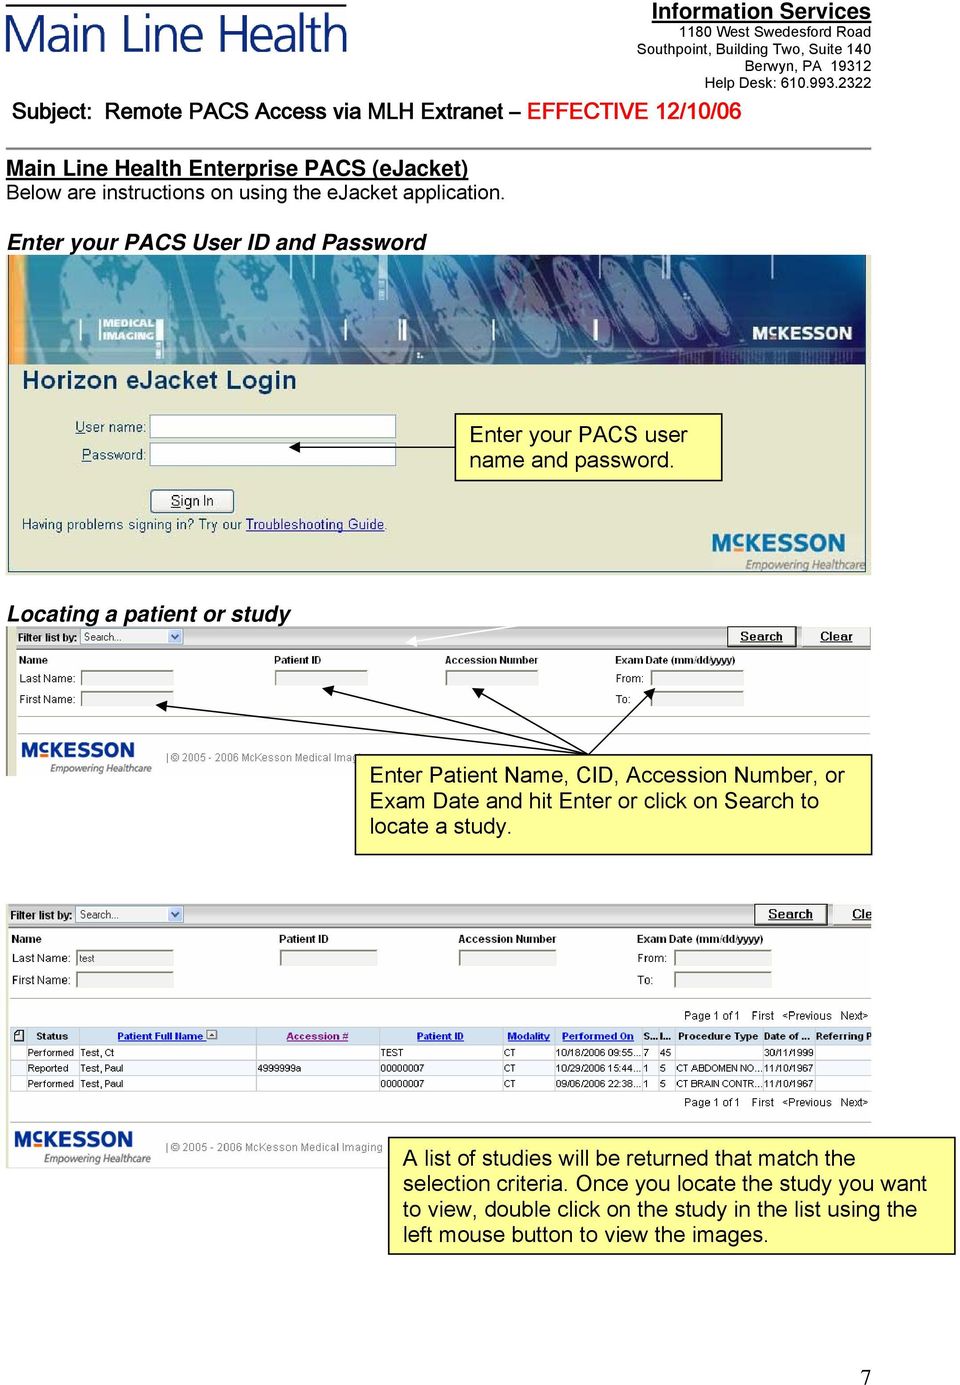 Locating a patient or study Enter Patient Name, CID, Accession Number, or Exam Date and hit Enter or click on Search to locate a